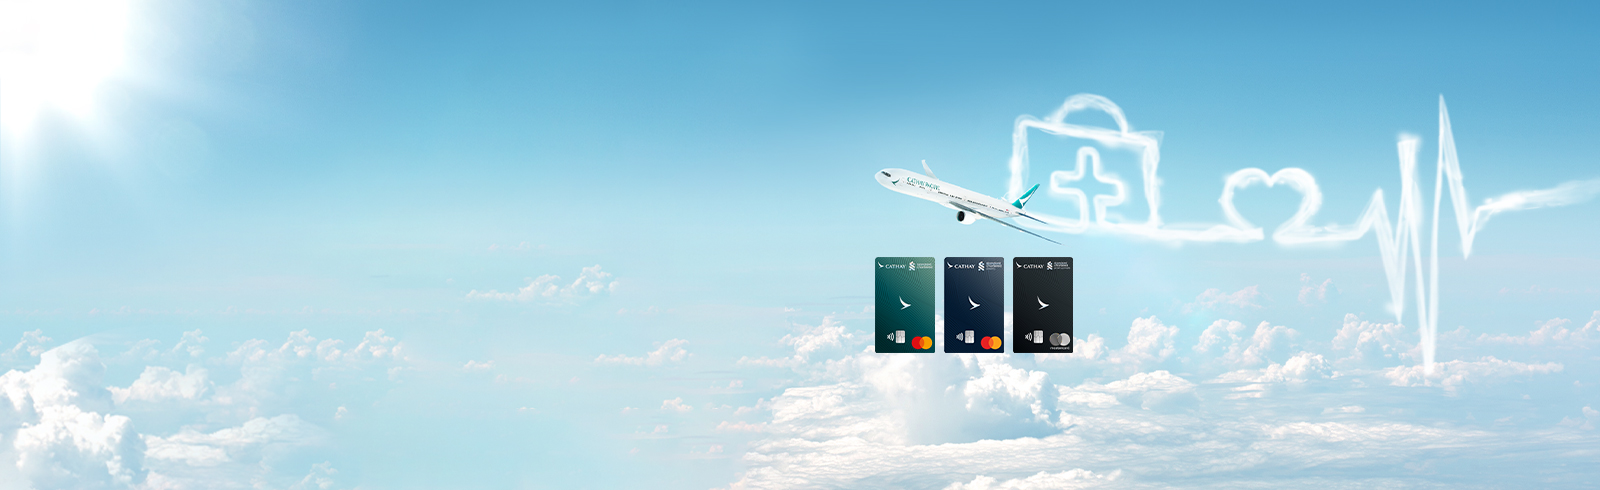 Airplane and Sea of clouds, used for promote the HealthCare eShop offers with Cathay Mastercard